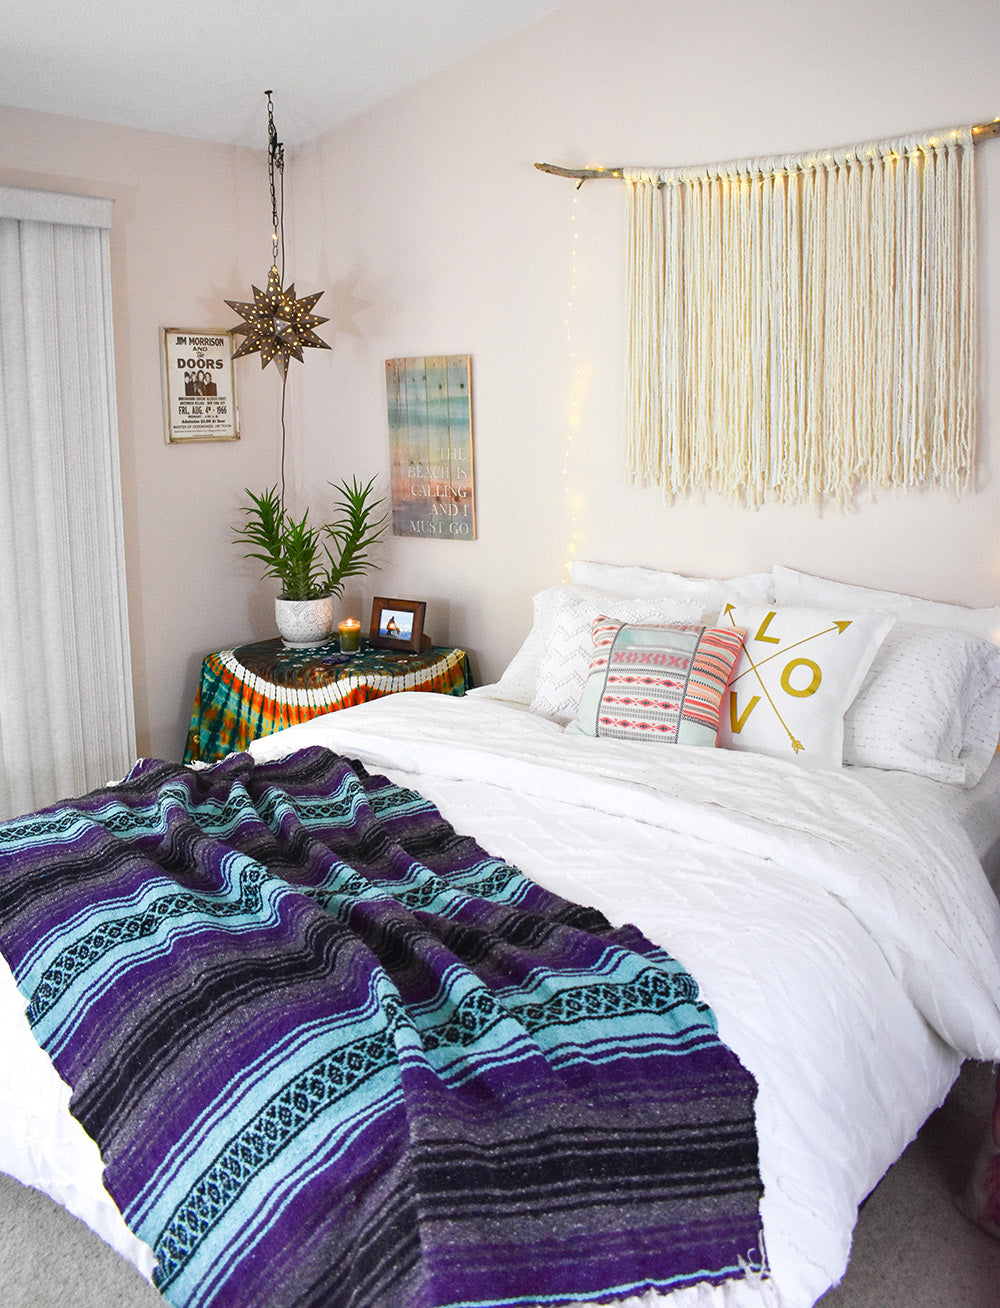 Dreamy bedroom decor - a chic boho blanket makes all the difference.